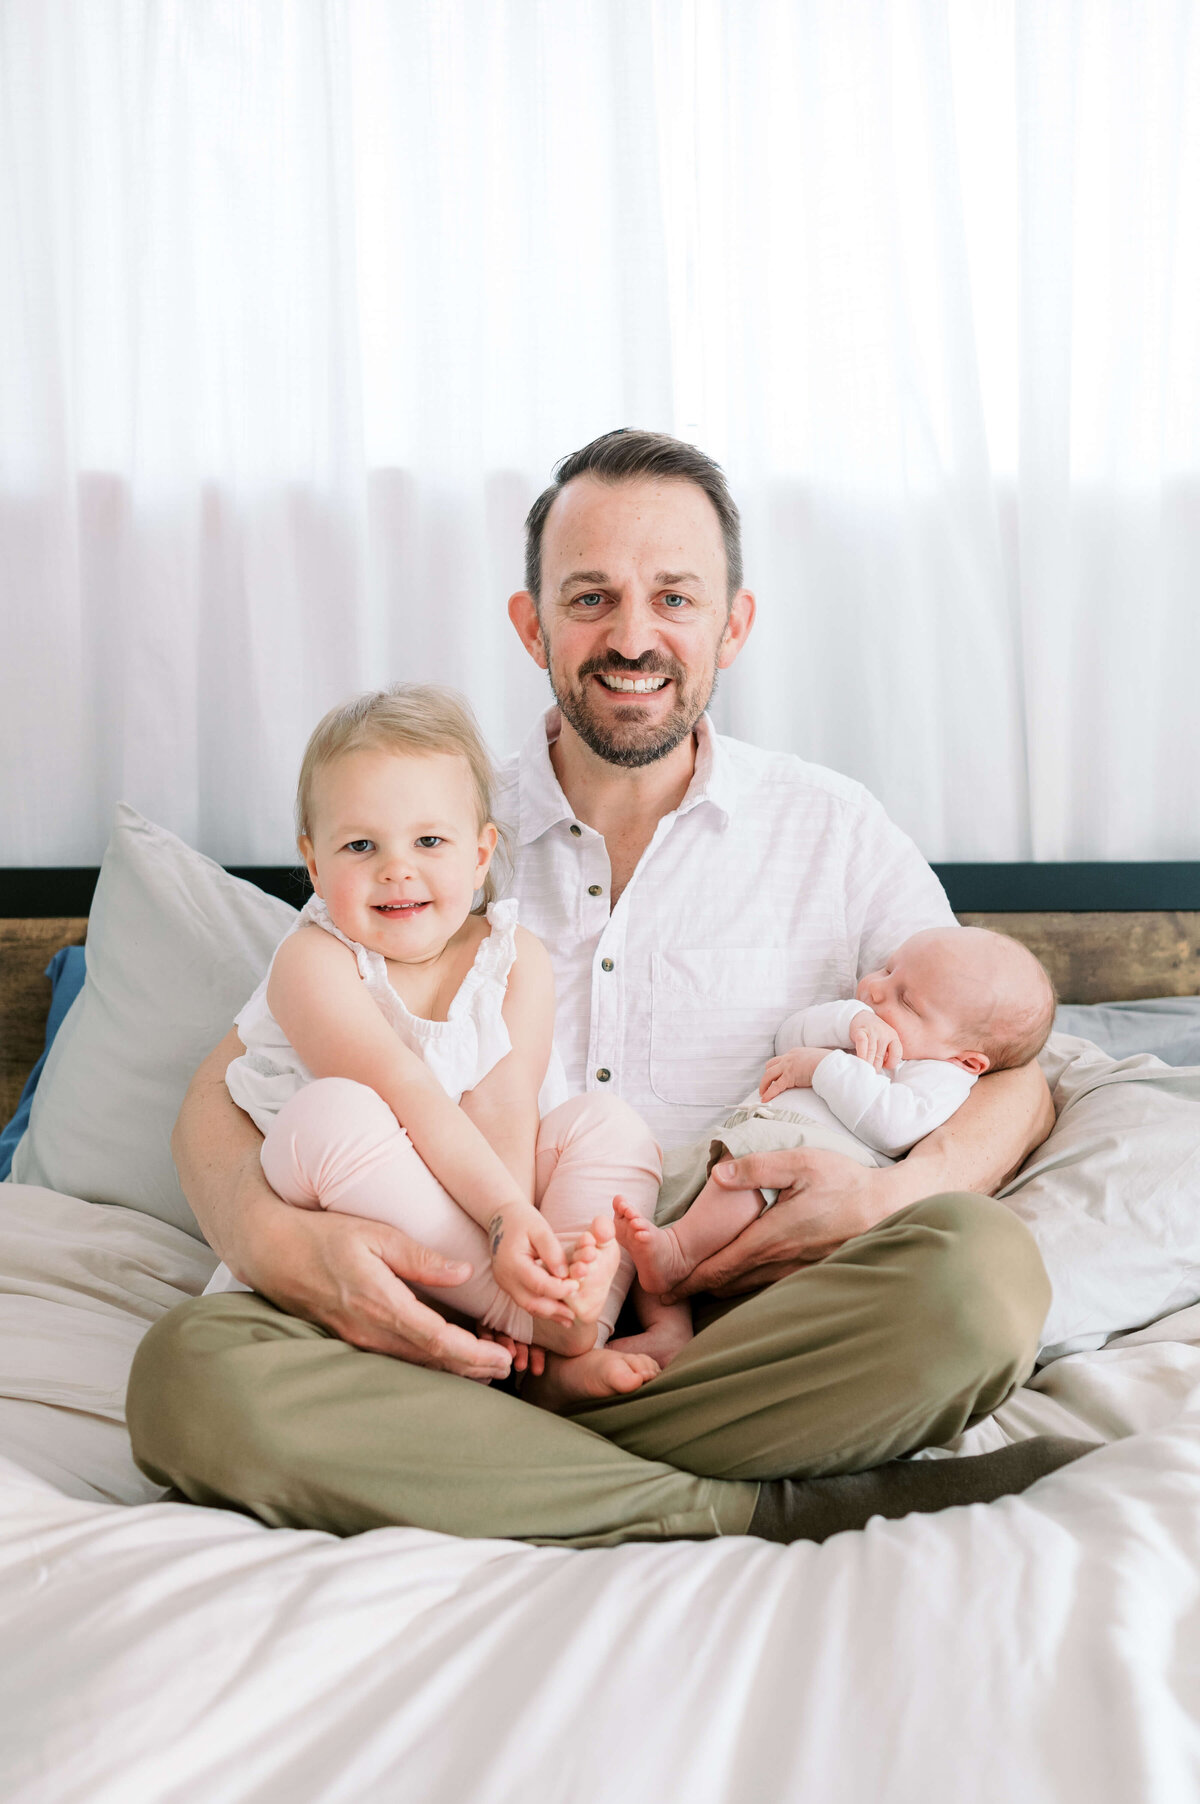 A well dressed man holds his young daughter and new son while sitting on his bed